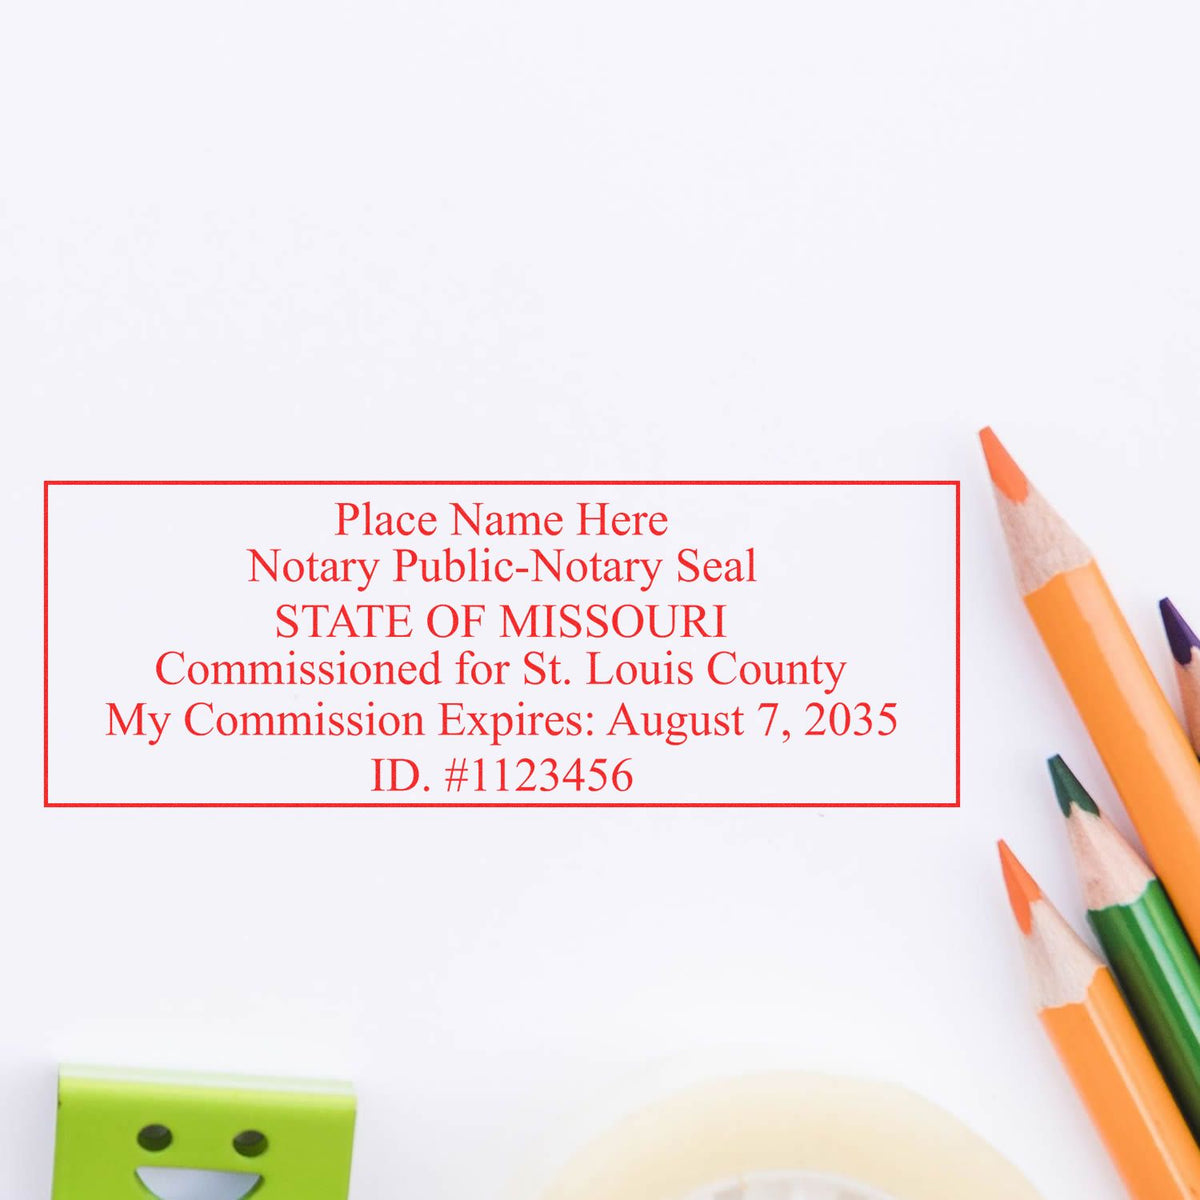 An alternative view of the Slim Pre-Inked Rectangular Notary Stamp for Missouri stamped on a sheet of paper showing the image in use